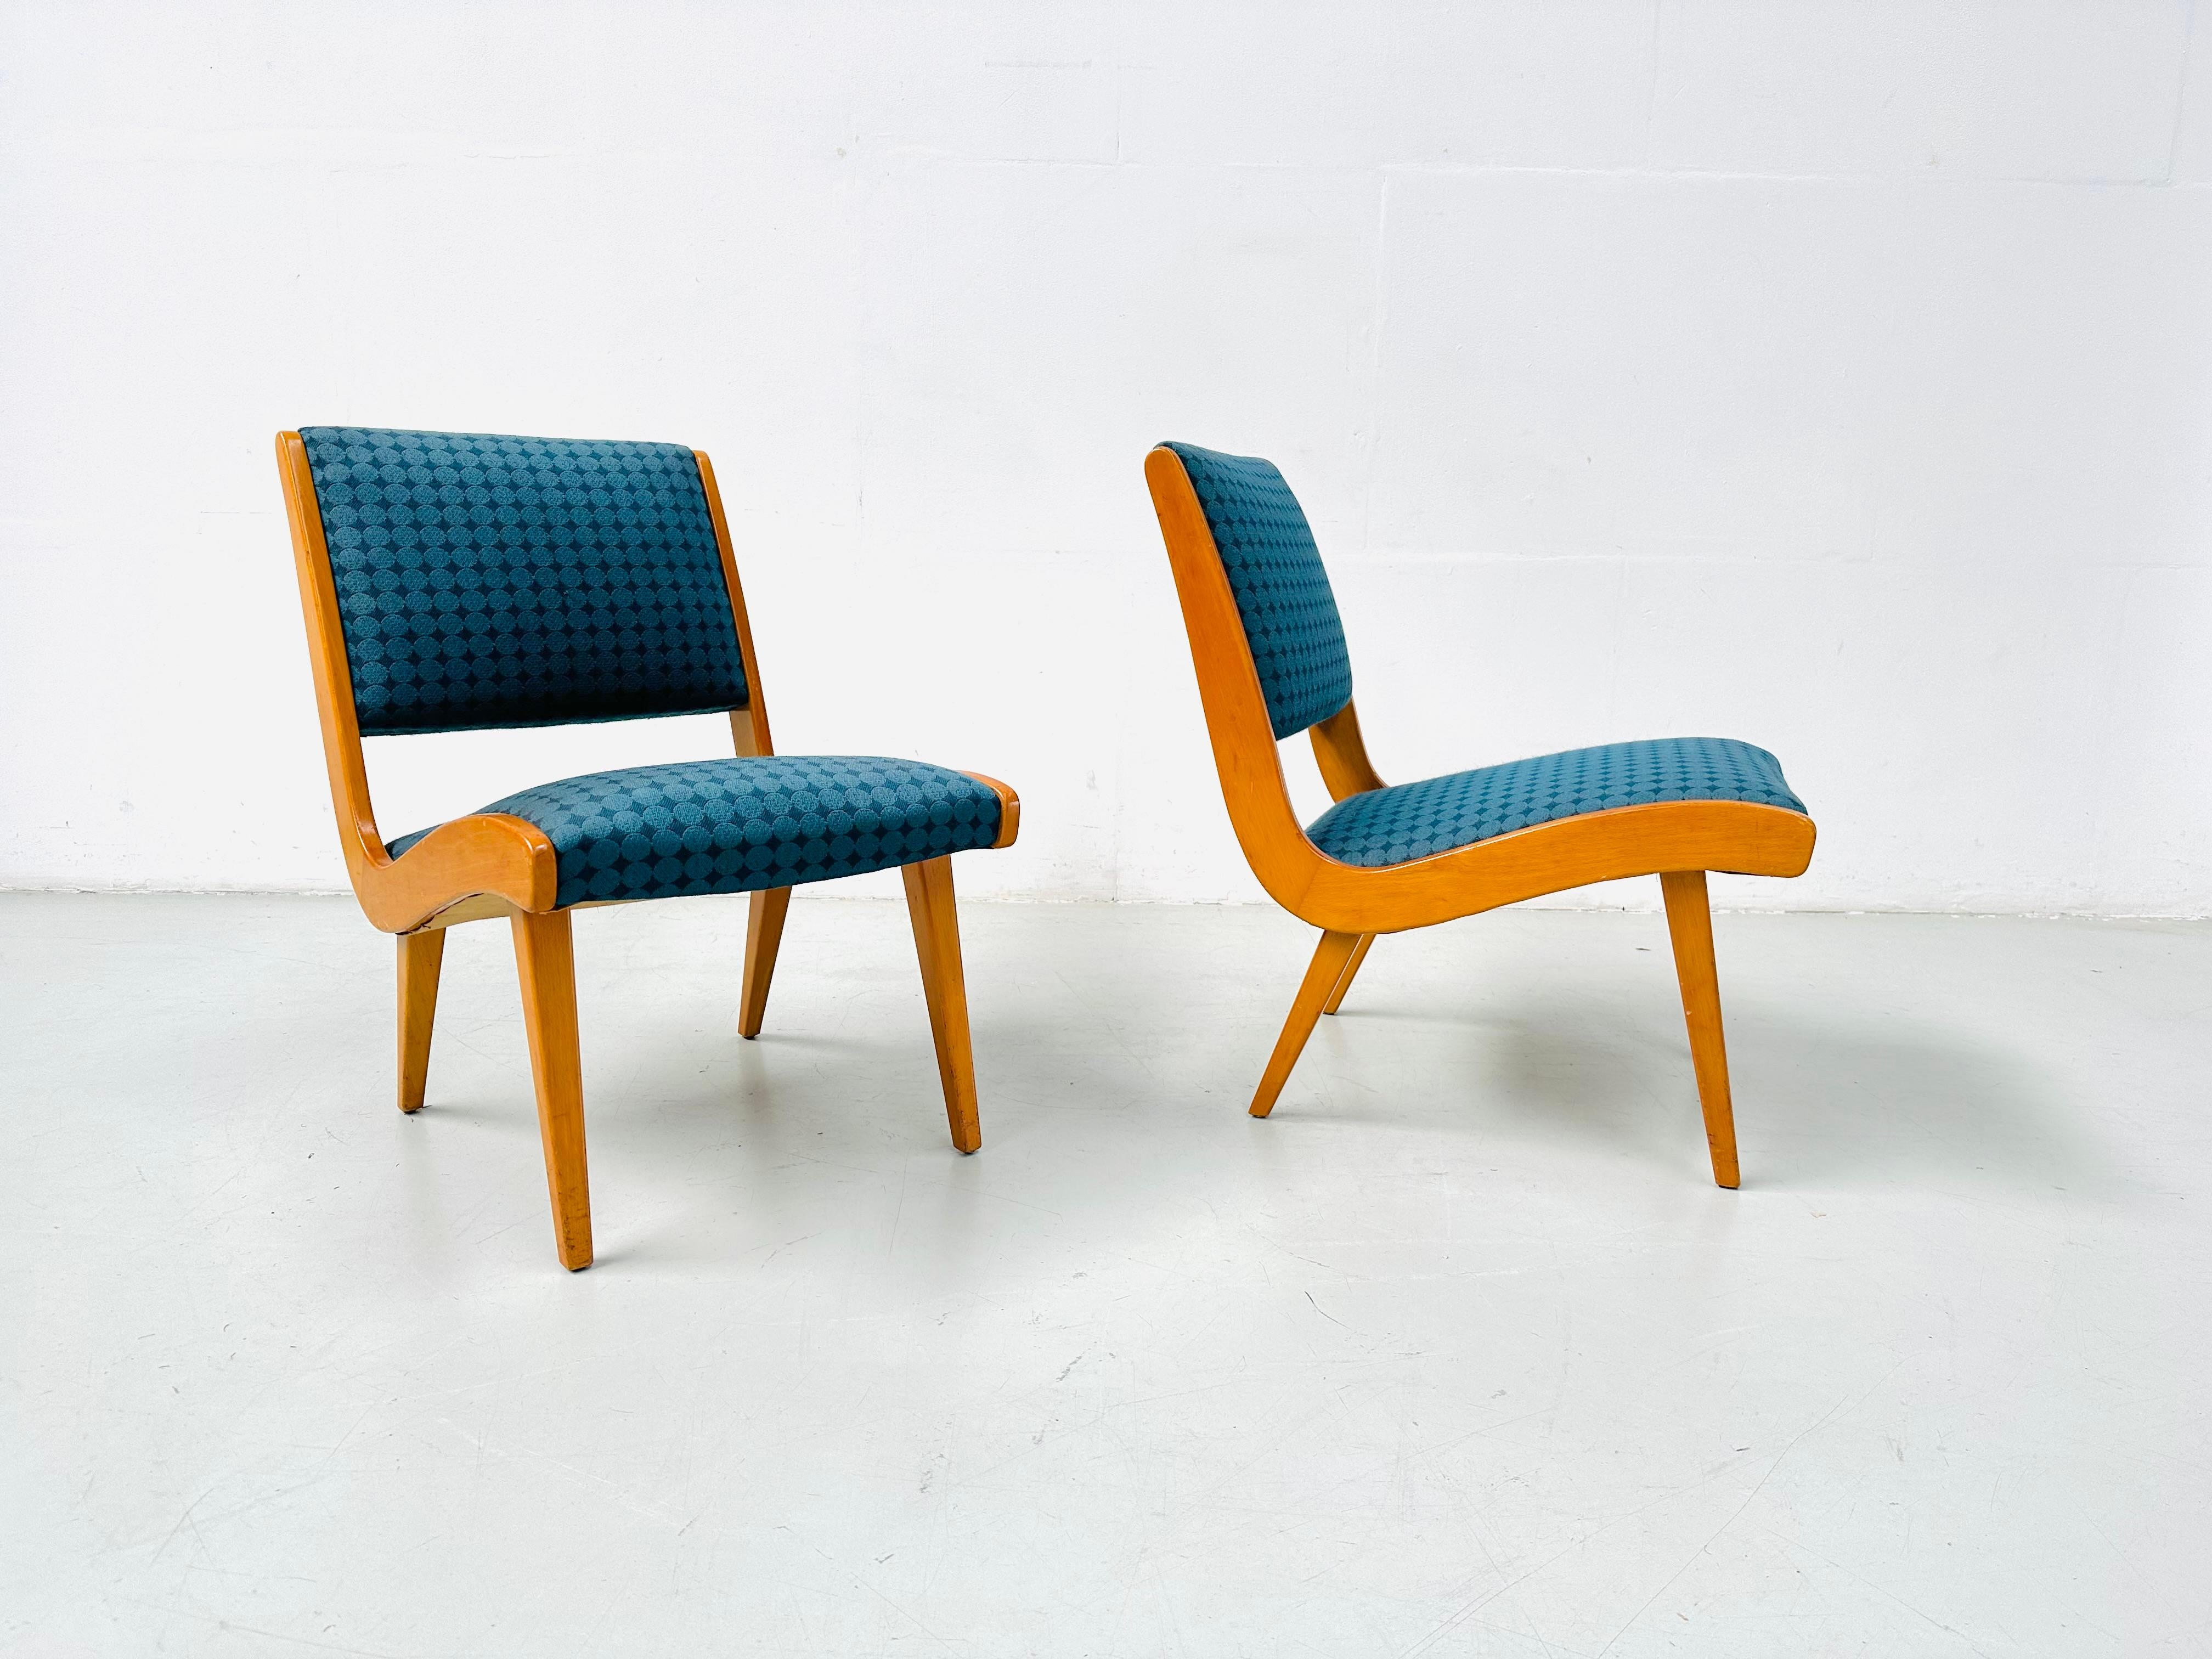 These rare “Vostra” easy chairs were designed by Jens Risom in 1941. These chairs are numbered in the frame. This is chair number 1247 and number 1248. The chairs are in good condtion. The original fabric is still on the chairs. 

The Vostra chair